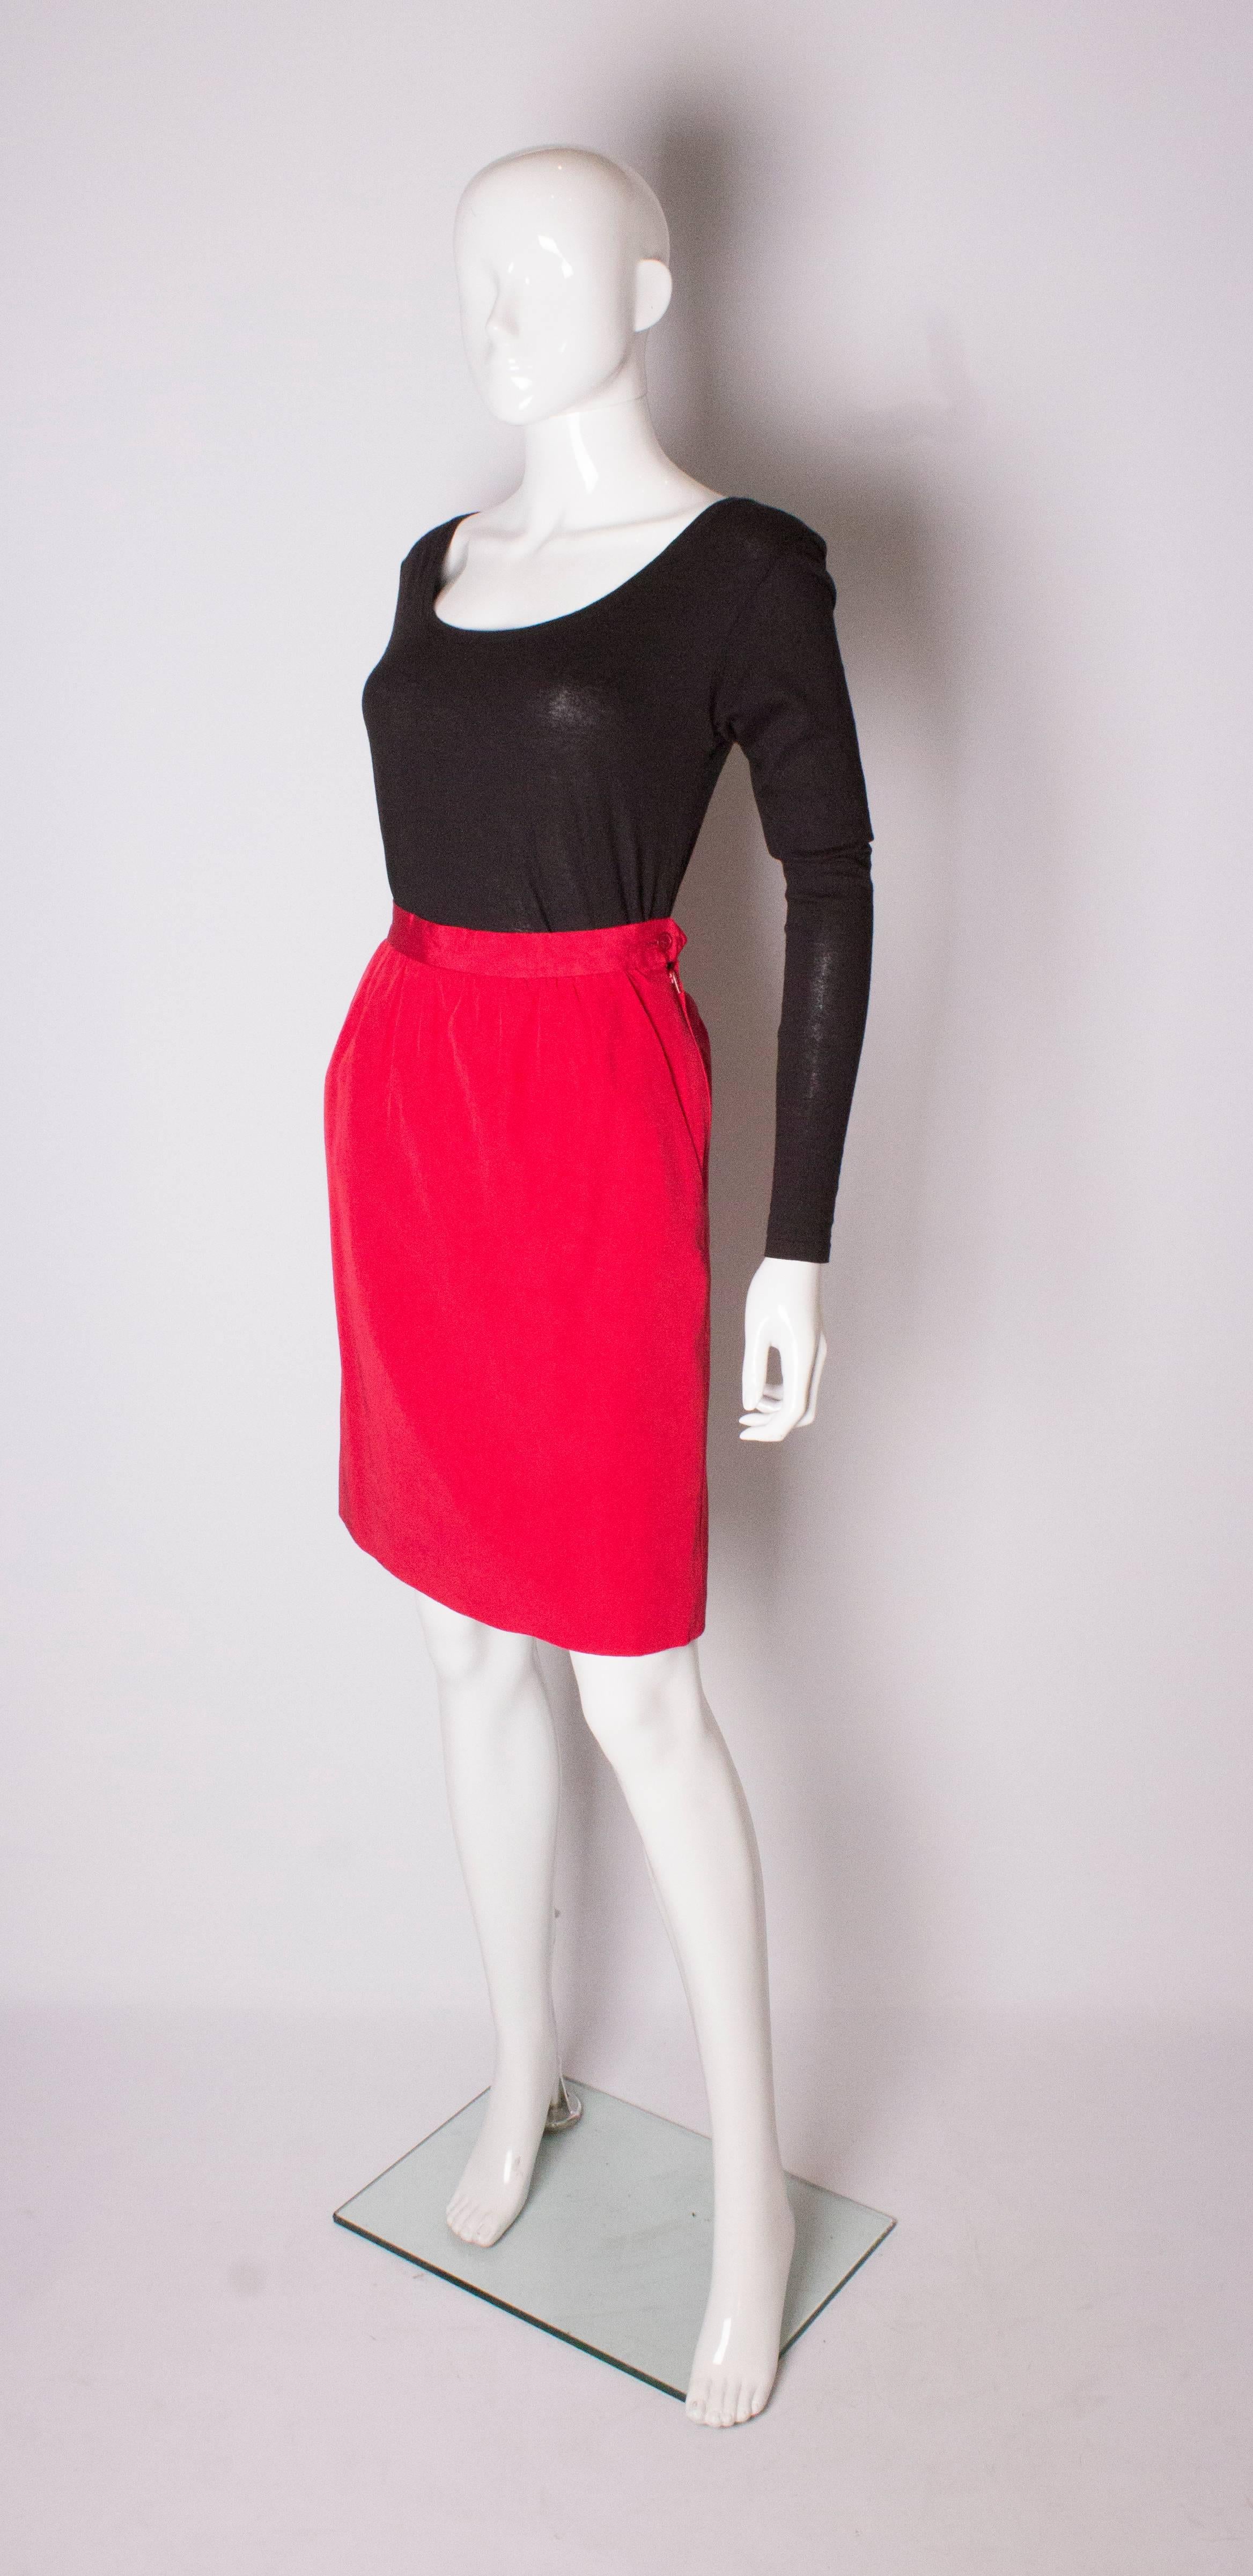 A chic vintage skirt by Yves Saint Laurent, Rive Gauche line. The skirt is a cotton and viscose mix ( 53% cotton, 47% viscose). It has sloping pockets on each side , gathering at the waist and a zip on the left hand side.